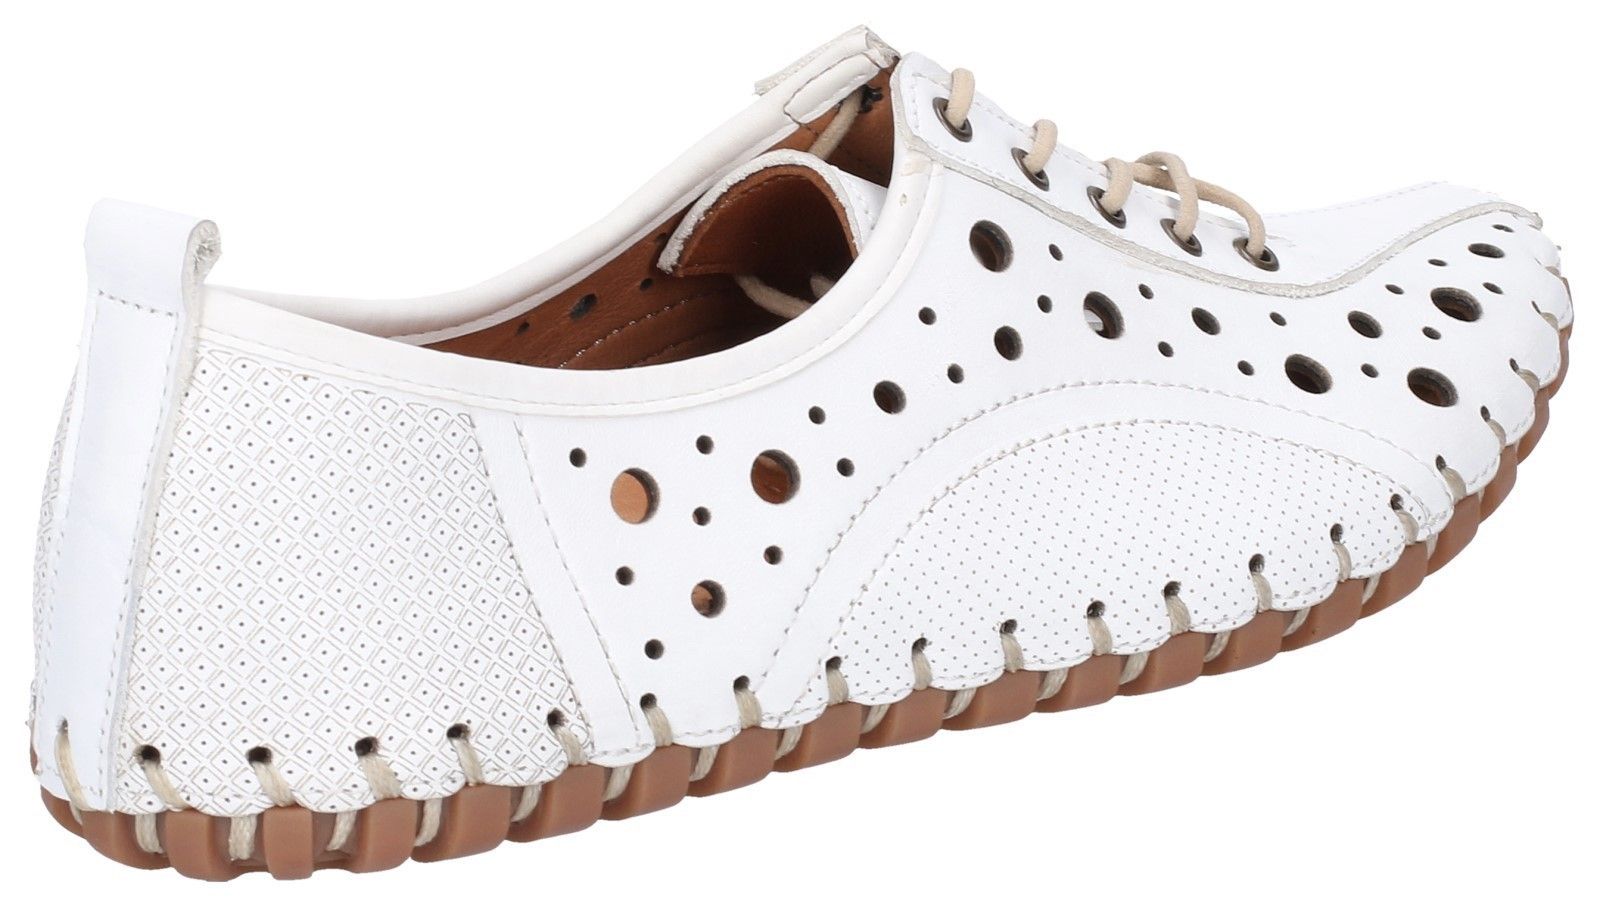 This ultra comfortable flat shoe keeps feet relaxed during summer with its breathable bubble perforations. A superbly flexible outsole with deeply cushioned foam foot bed moves with the natural gait of the foot. Elastic lace for removable comfort. Ultra comfortable and breathable women's flat casual shoe. 
Luxuriously soft full grain leather upper. 
Easy slip-on transformation with stretchy elastic lace front. 
Five metallic eyelets for personalised fit. 
Breathable bubble perforations adorn the upper.